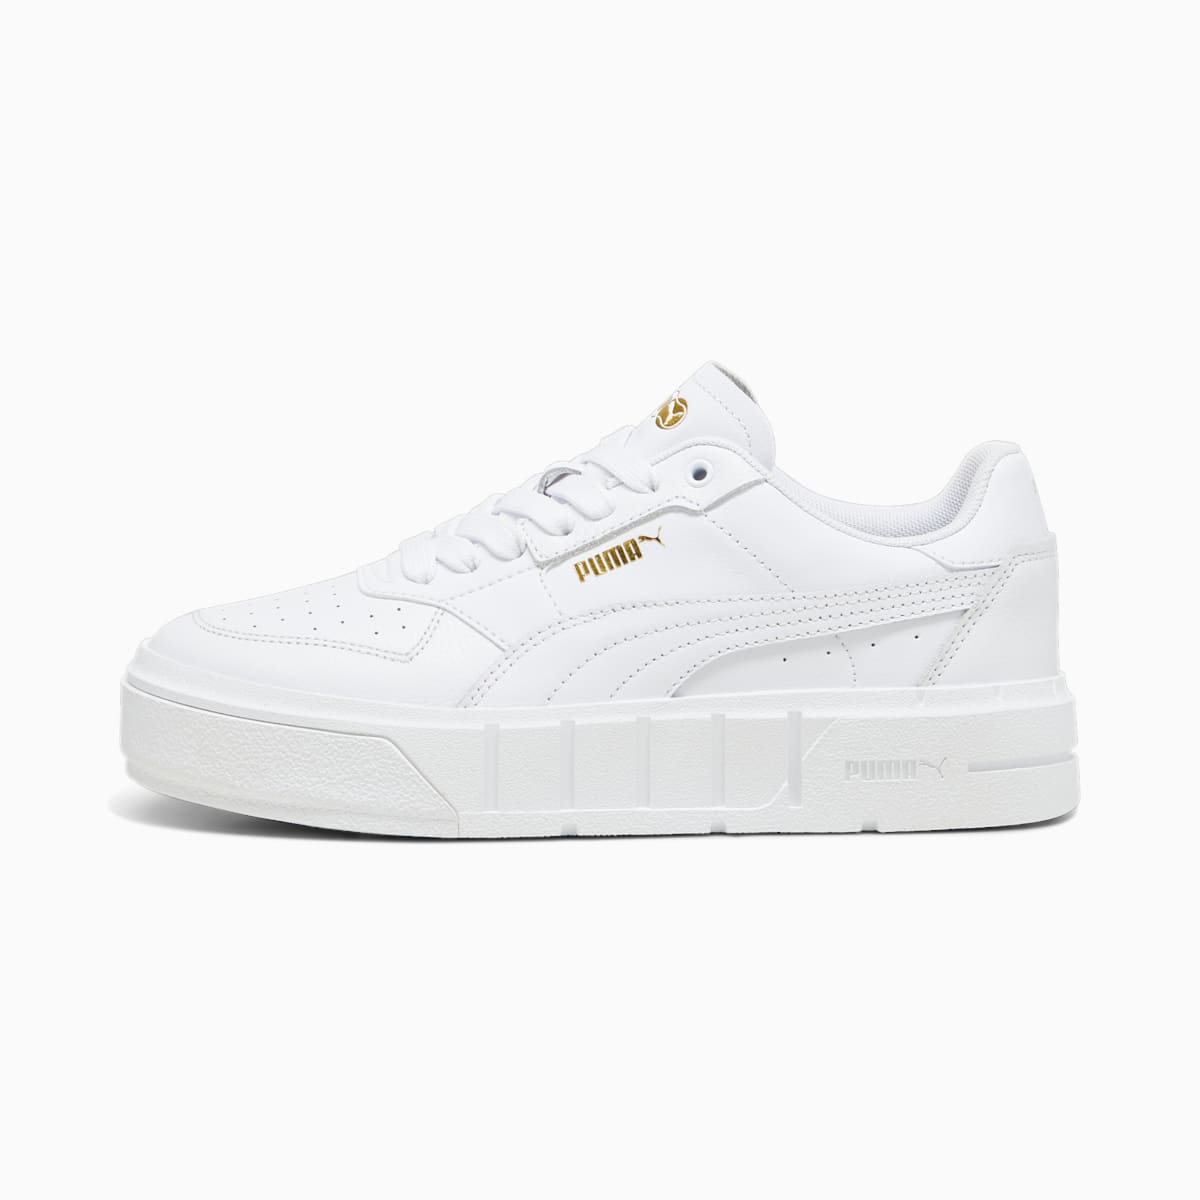 PUMA Cali Court Leather Women's Sneakers